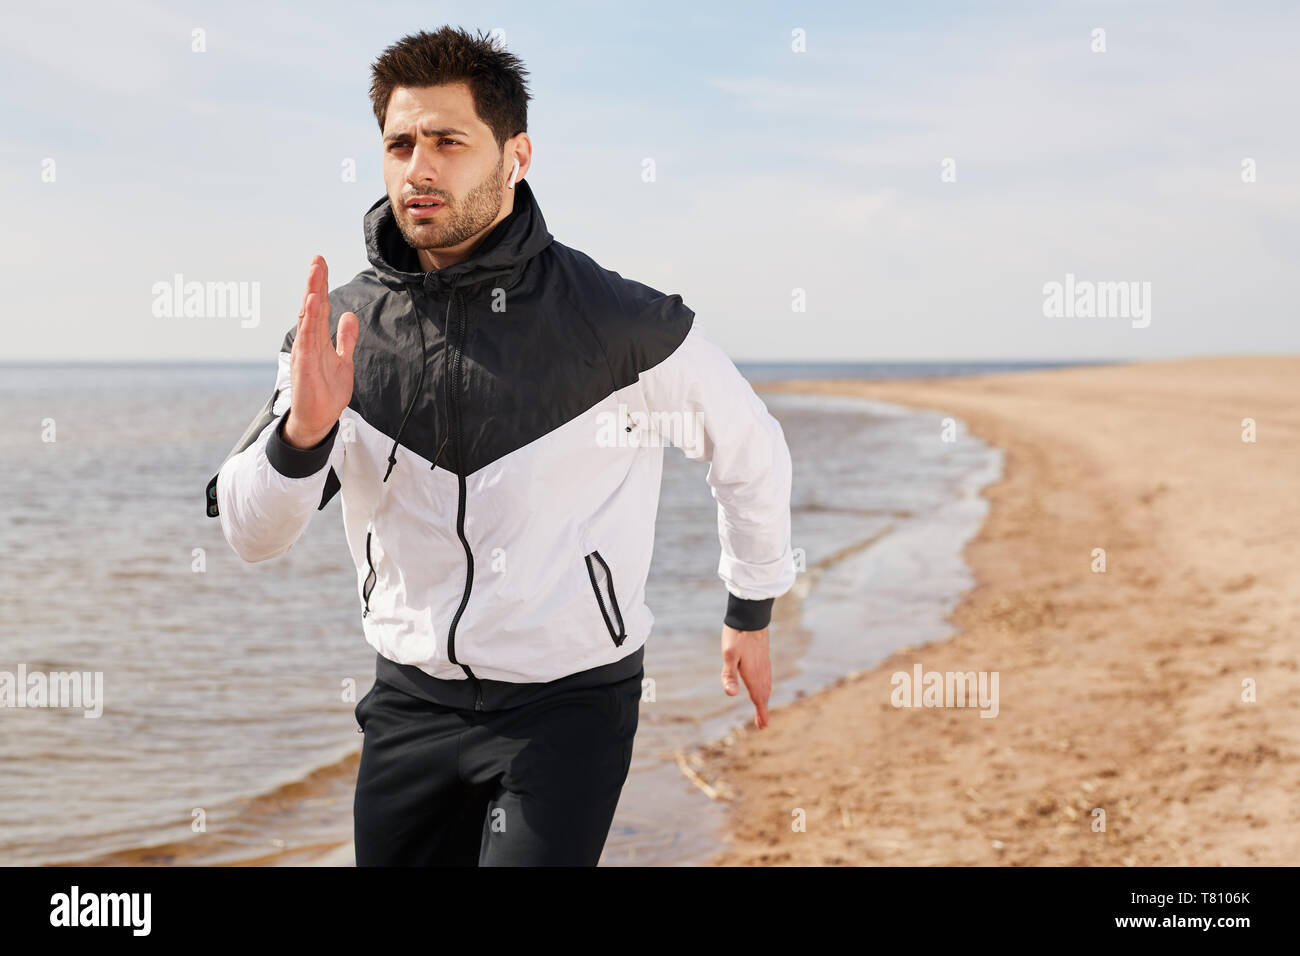 Guy jogging on the beach Stock Photo